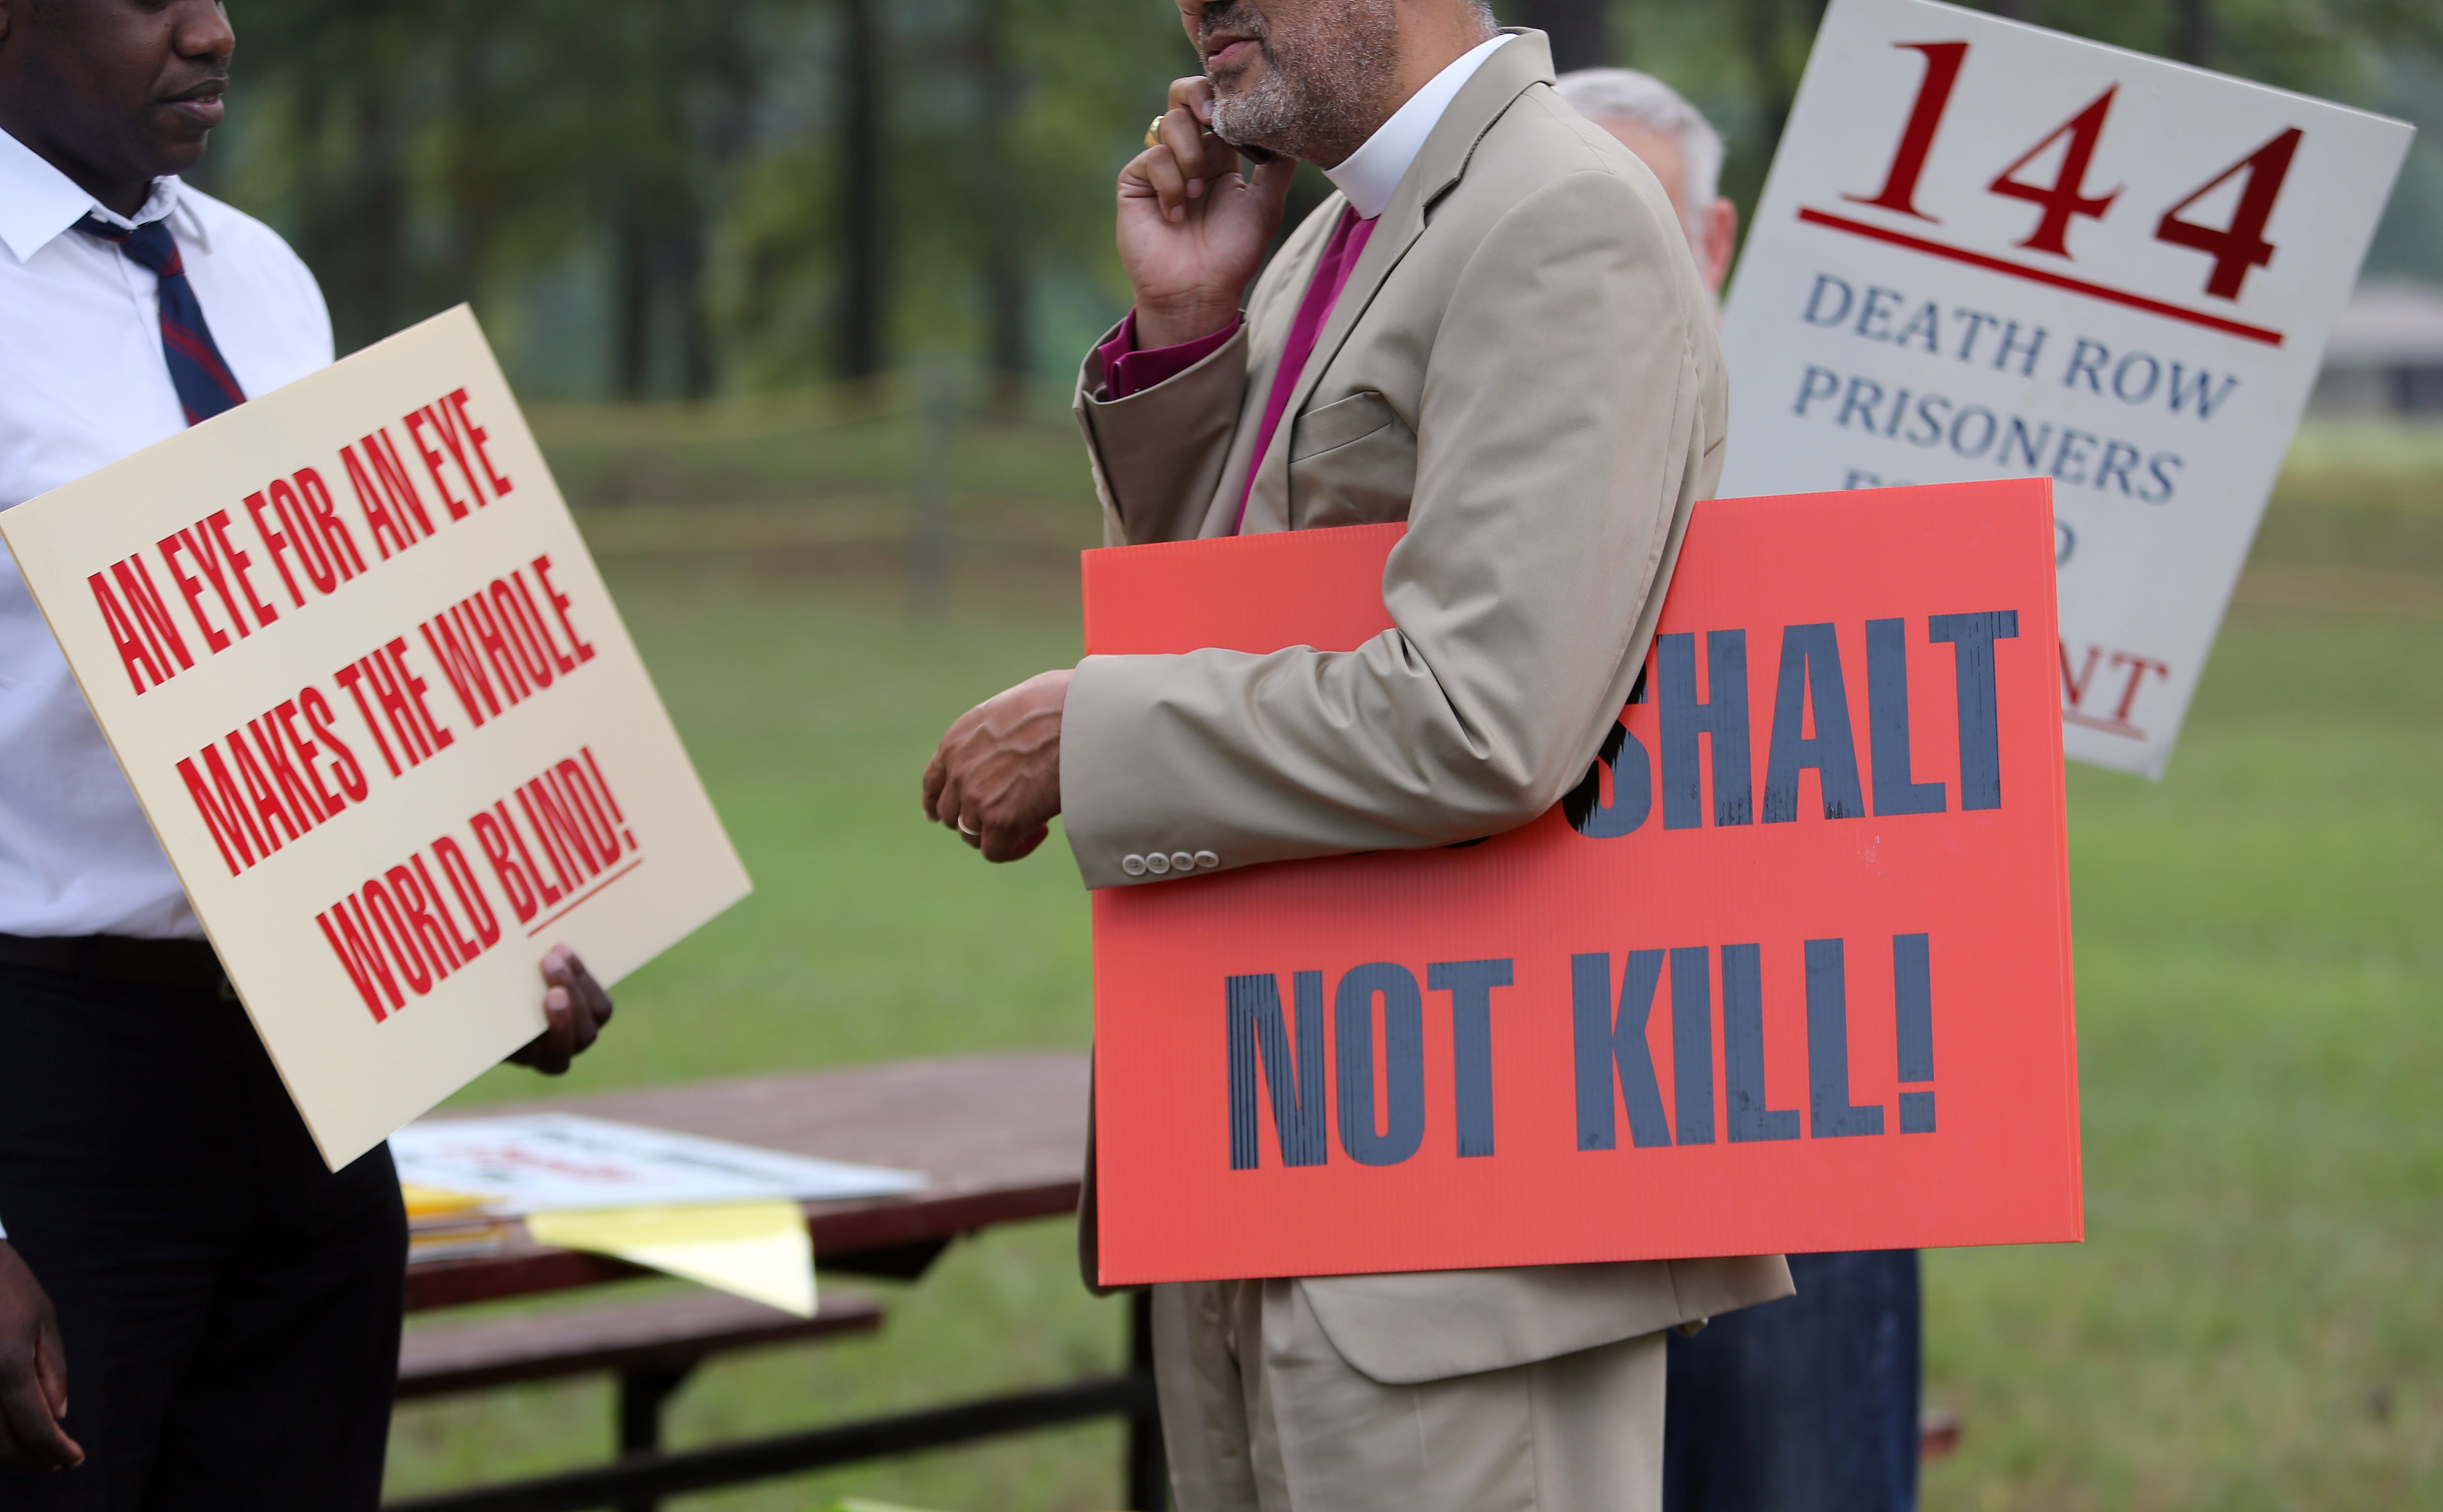 Death-penalty opponents gather at Jackson State Diagnostic Prison in Jackson, Ga., where Marcus Wellons was scheduled to be put to death by lethal injection later Tuesday.